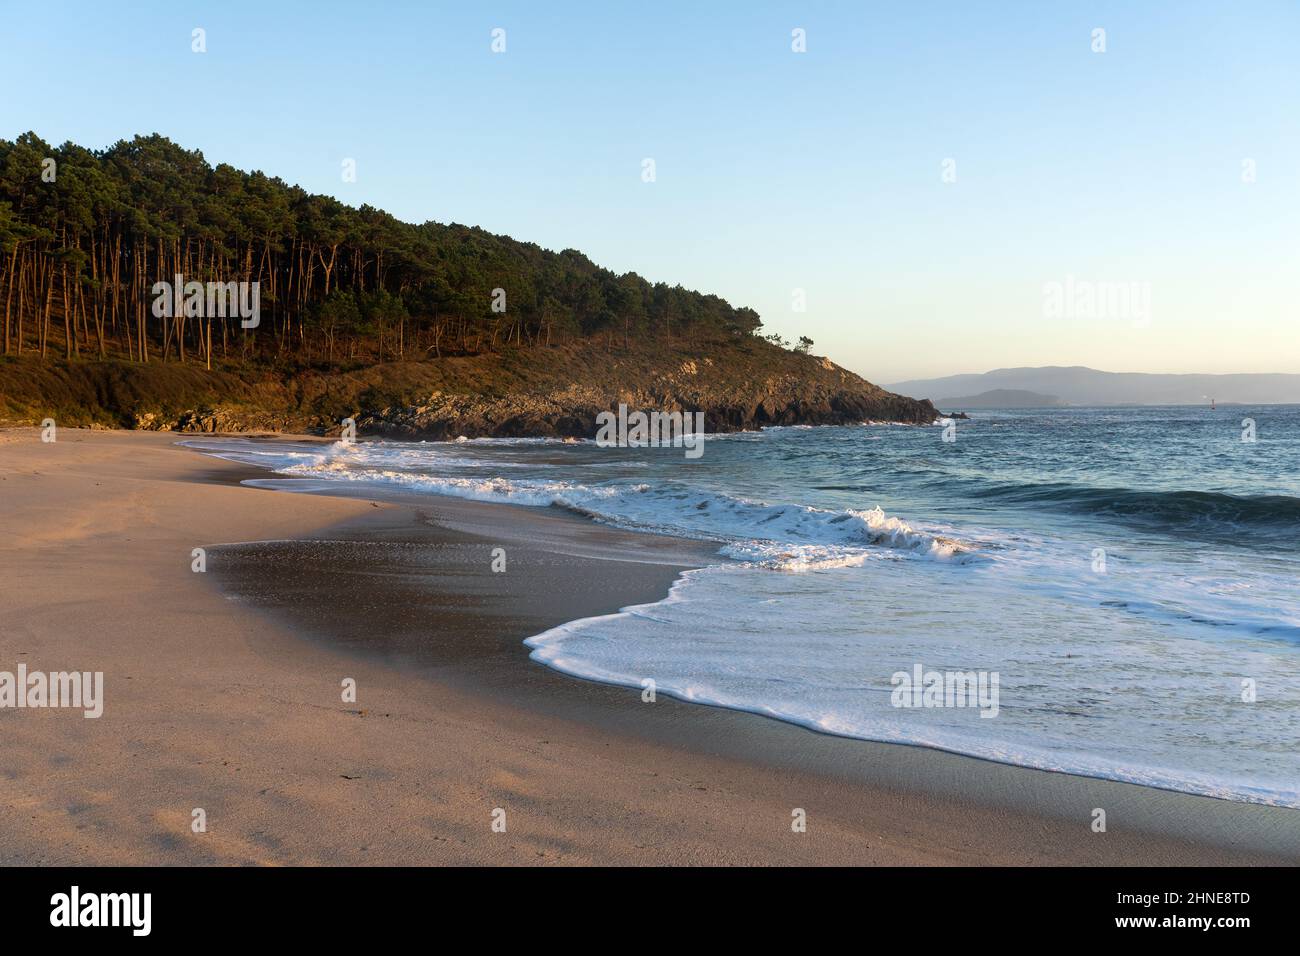 Melide beach surrounded by a pine forest in Home Cape natural zone at sunset in Rias Baixas. Pontevedra, Galicia, Spain. Stock Photo